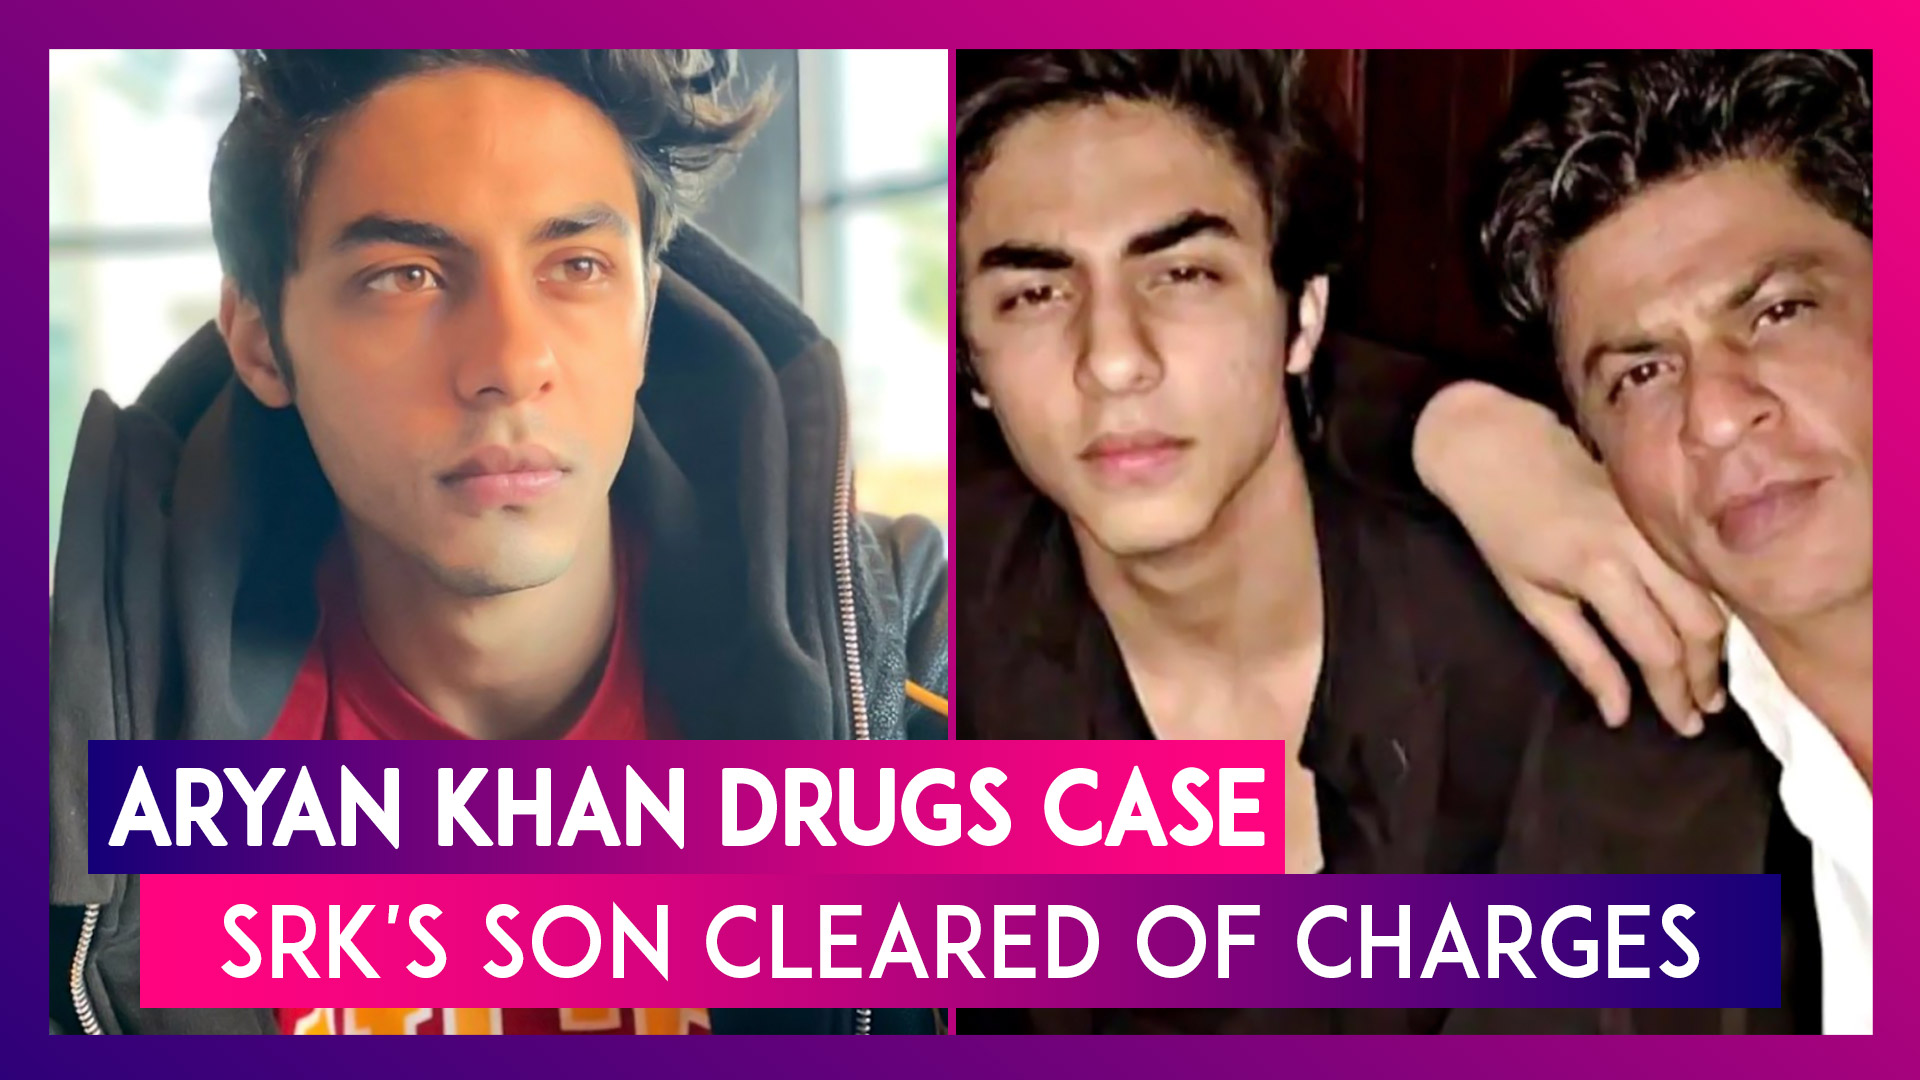 Aryan Khan Drugs Case: SRK's Son Cleared Of Charges Due To Lack Of Evidence